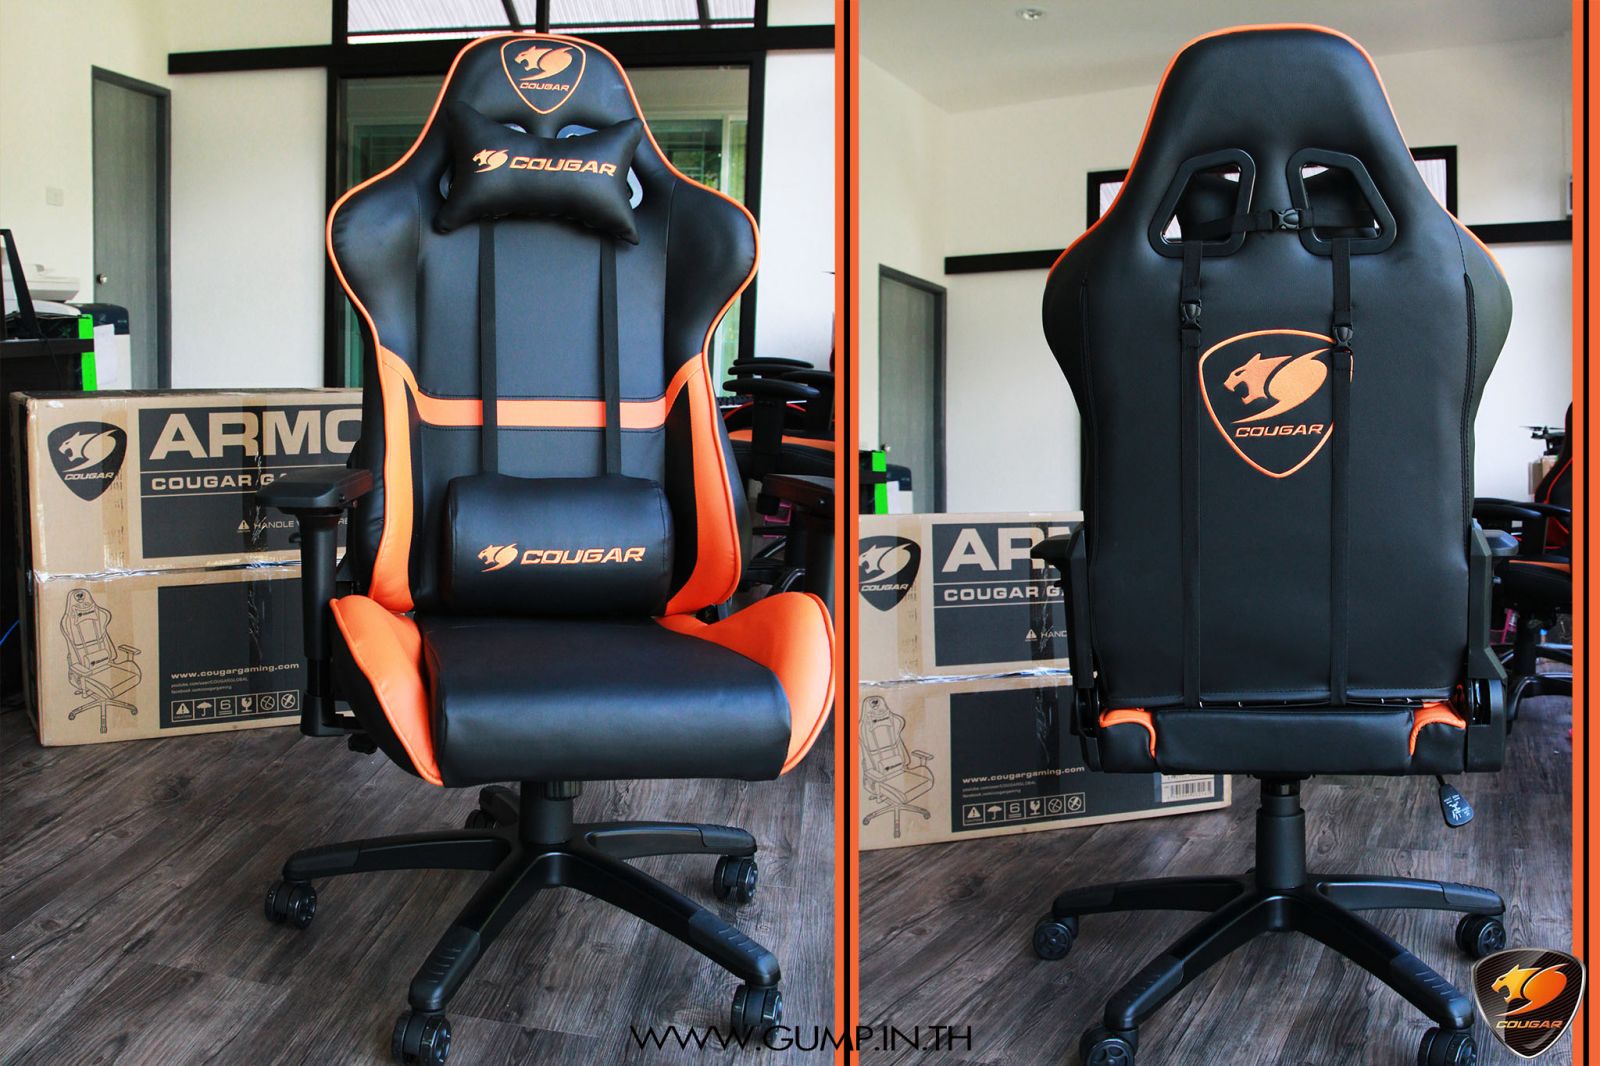  Review   Cougar  Armor Gaming  Chair  GUMP IN TH